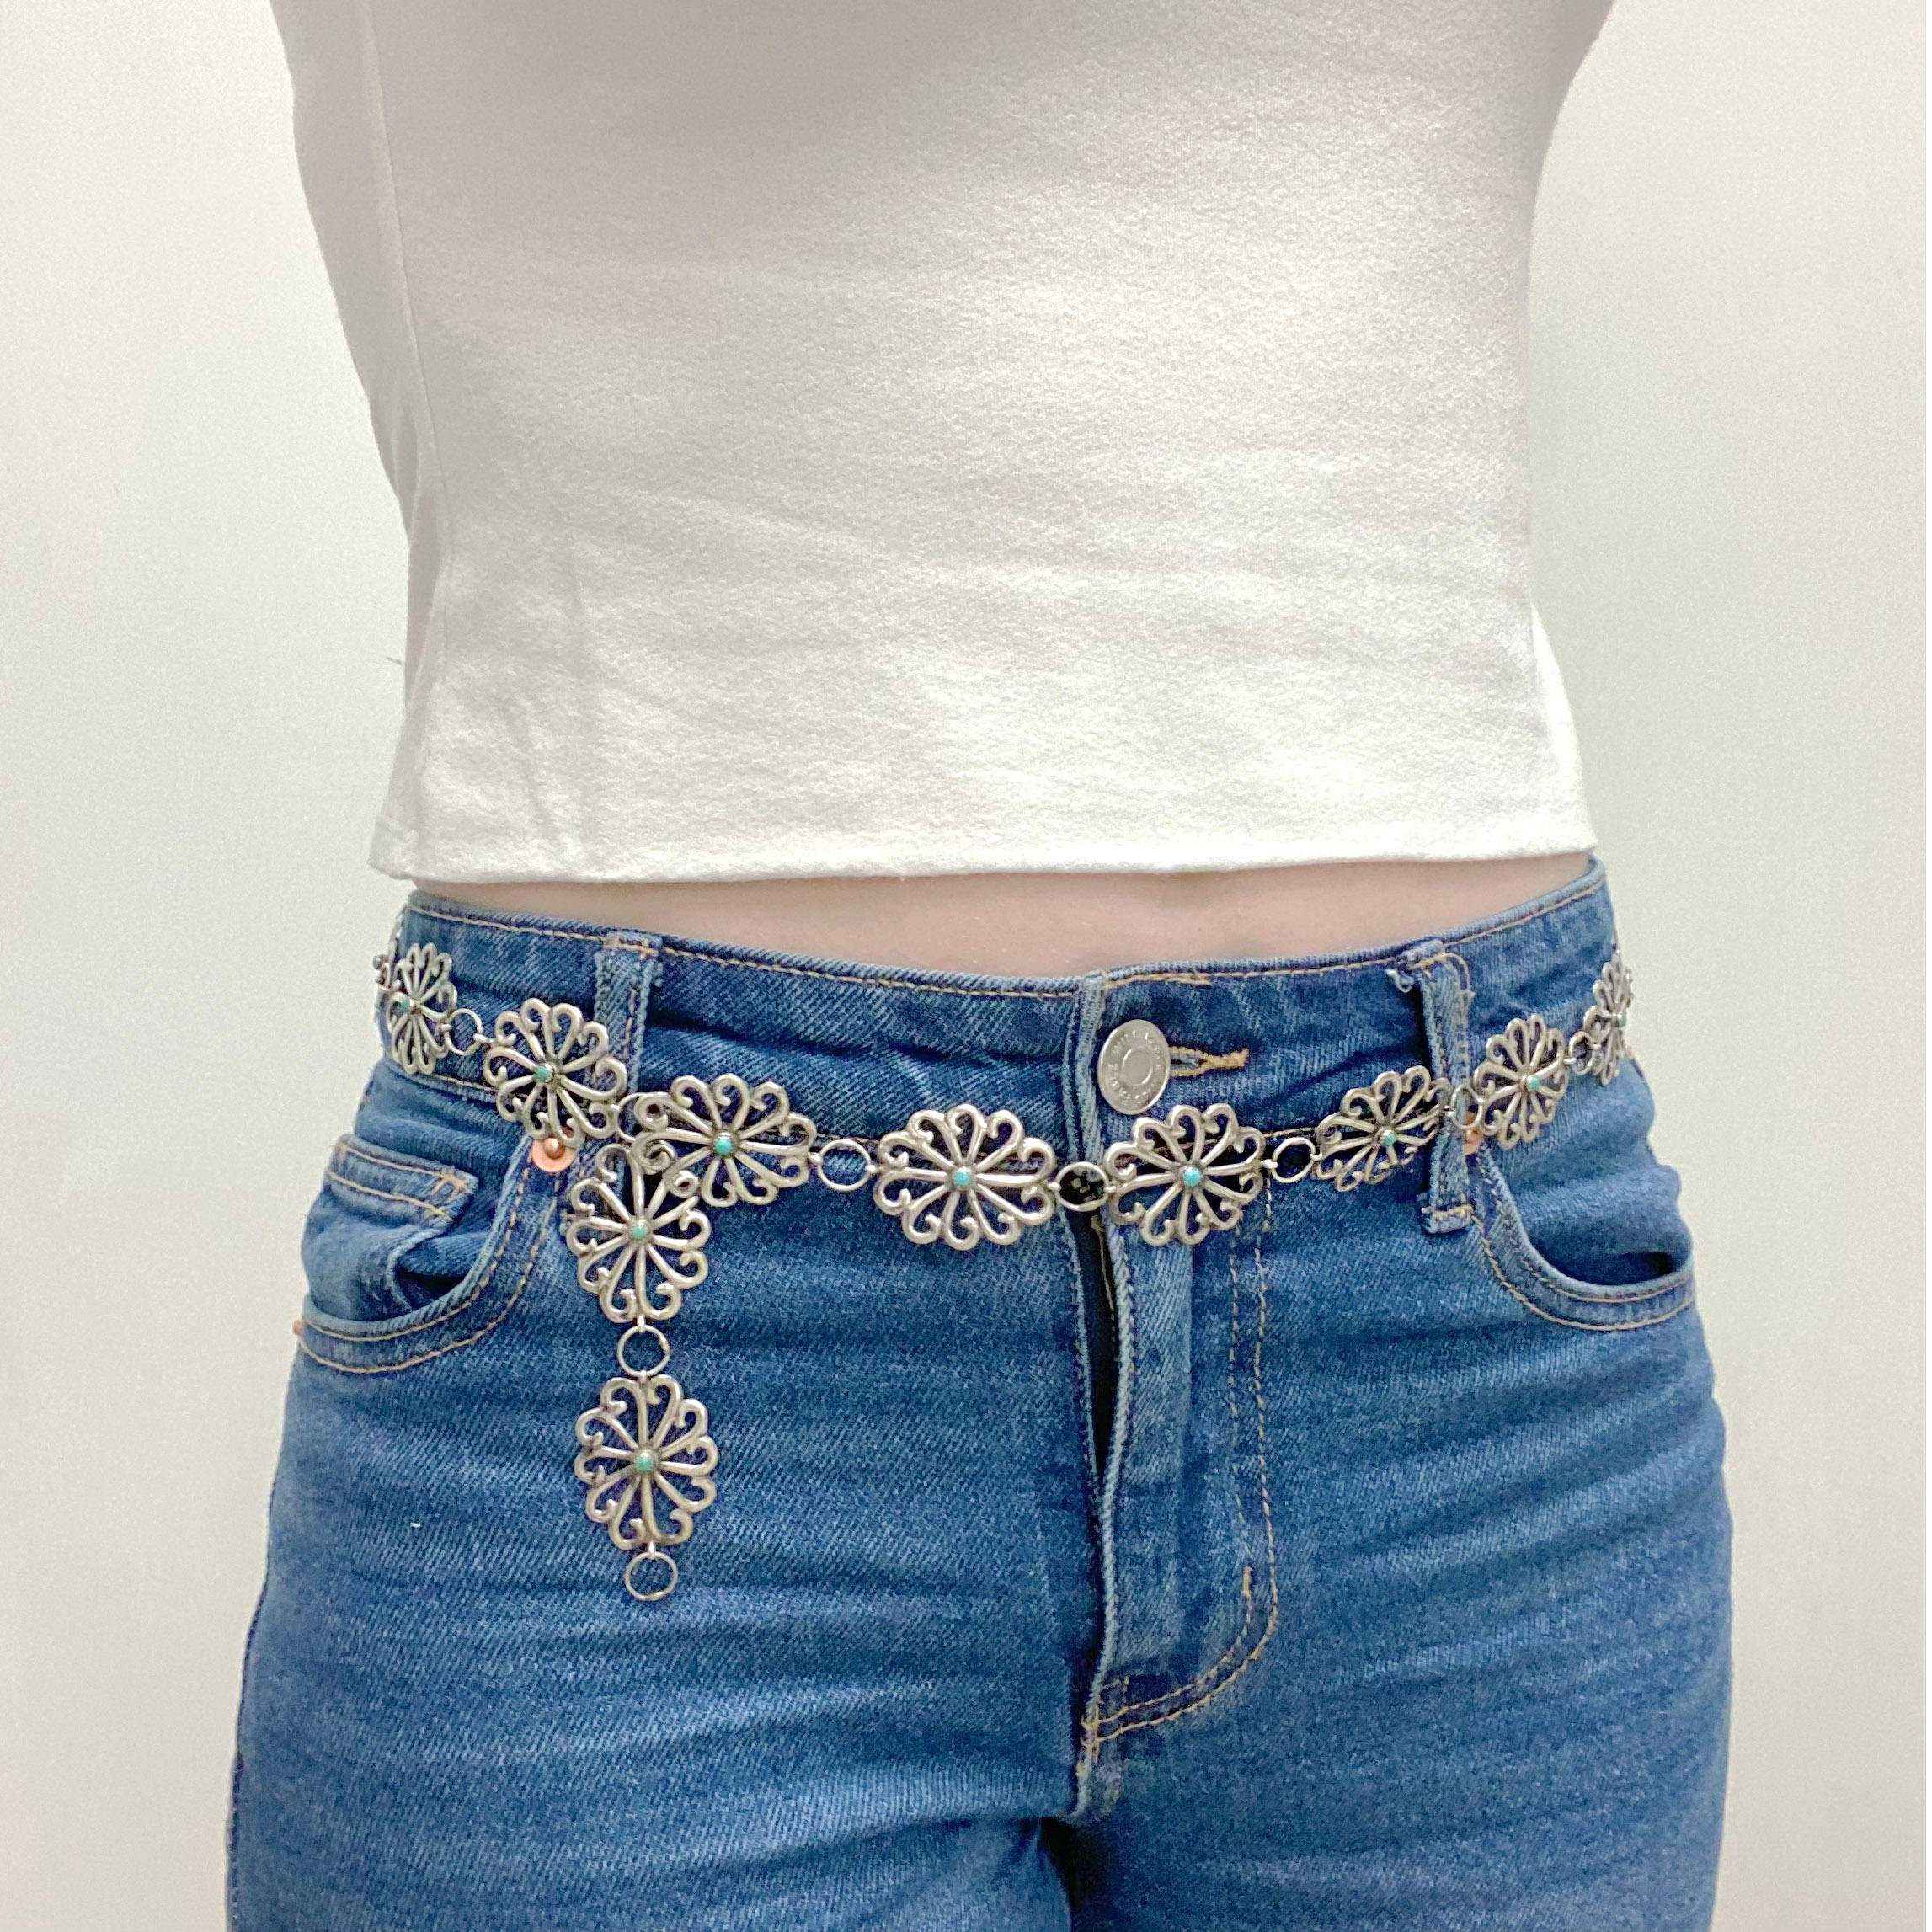 The Indian tribe of Zuni is known for their fabulous silver work! It is all hand fabricated and handmade. This glorious belt looks great with a dress or a can rock jeans or jean shorts! The length is perfect for anyone a size XS, S, or M. Each